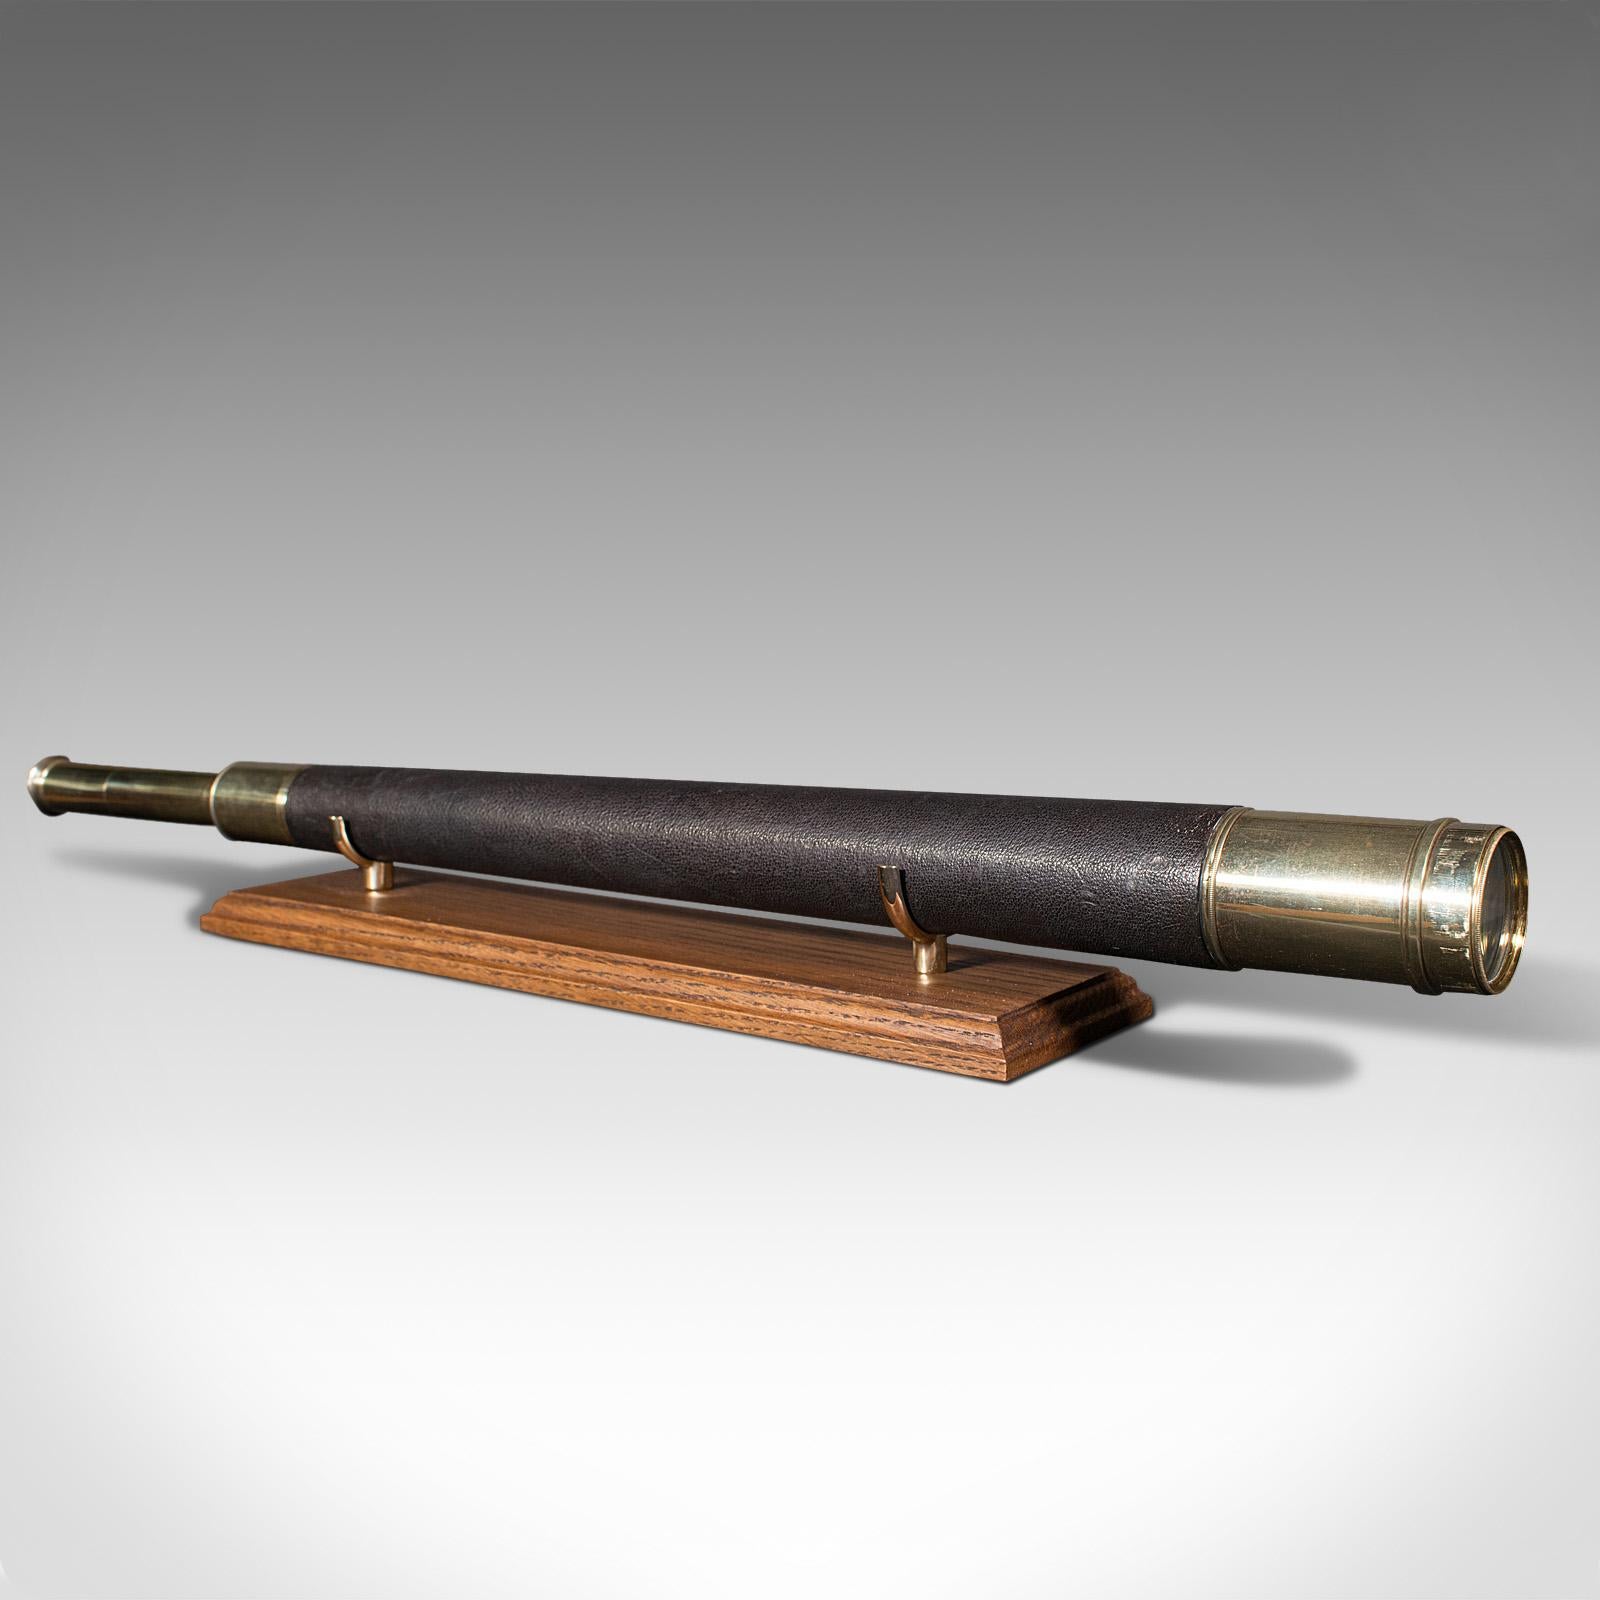 This is a large antique 'officer of the watch' telescope. An English, single draw refractor for terrestrial or astronomical use by Dollond of London, dating to the late Victorian period, circa 1890.

Perfect for bird watching, landscape